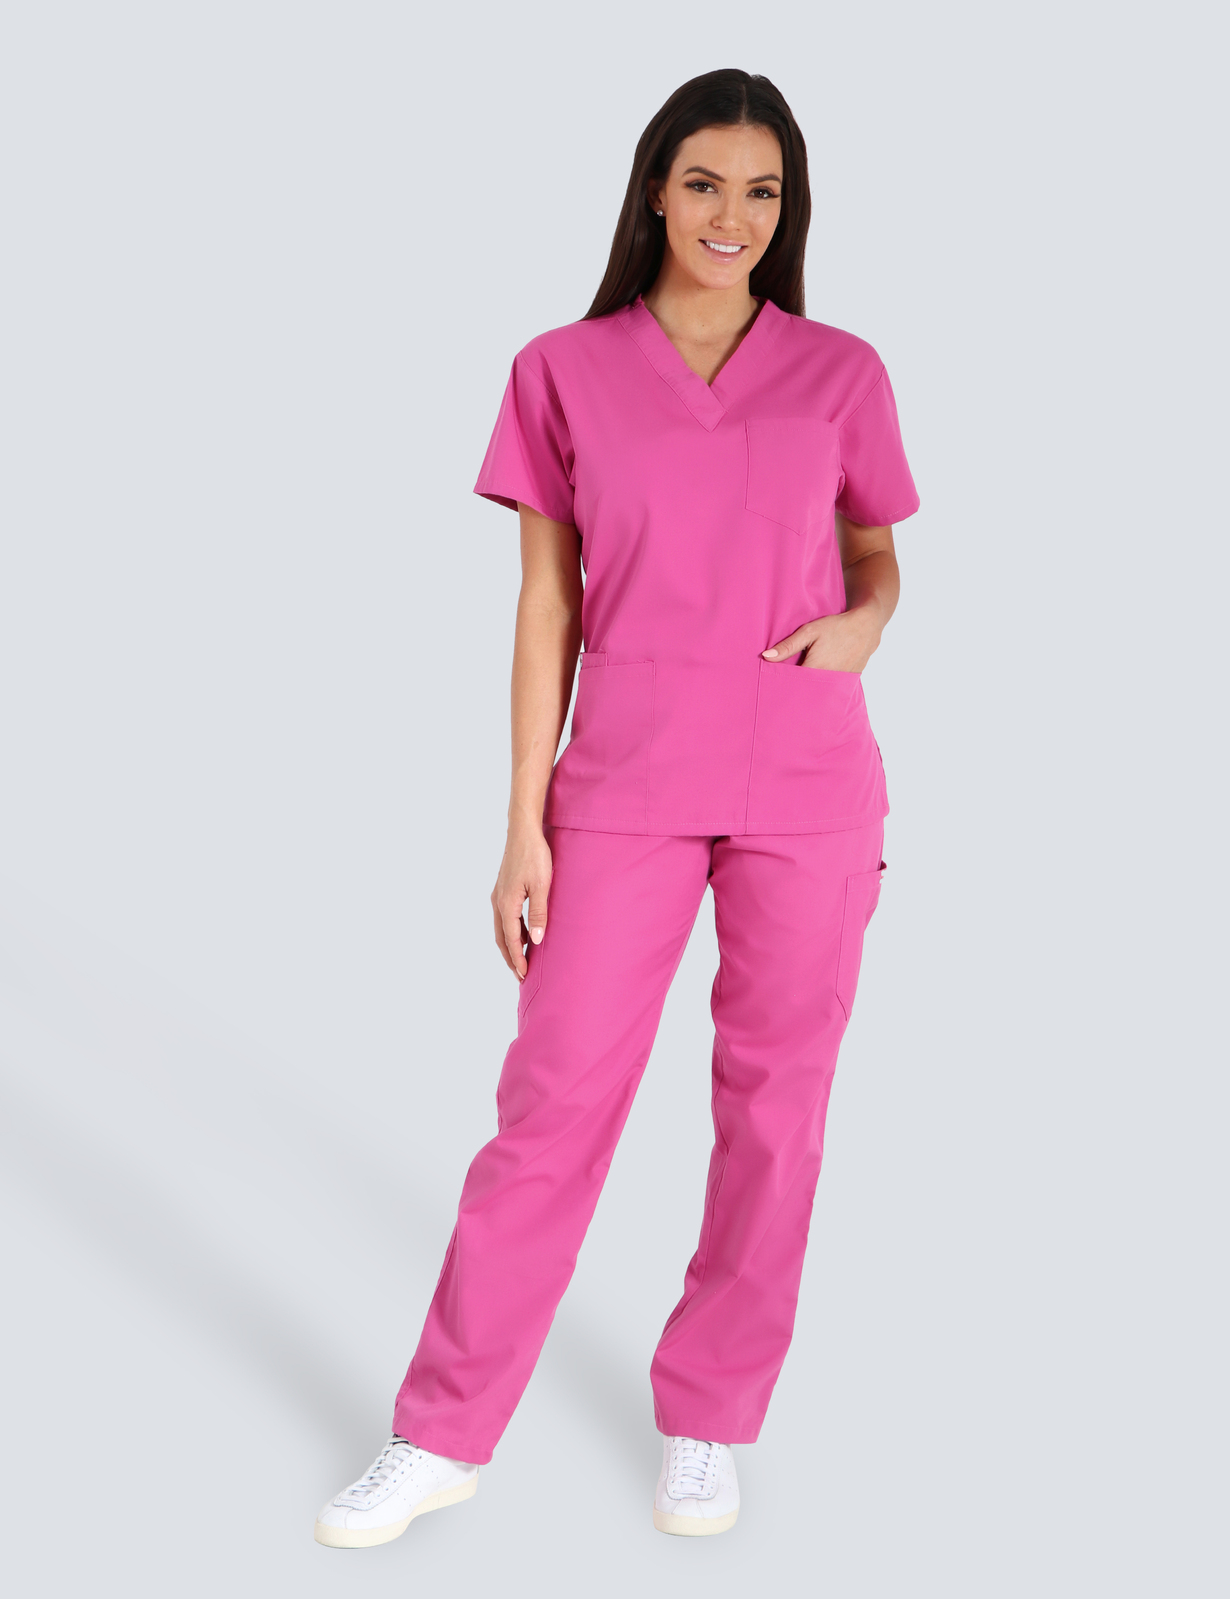 RBWH - Grantley Stable Neonatal Unit (4 Pocket Scrub Top and Cargo Pants in Pink incl Logos)